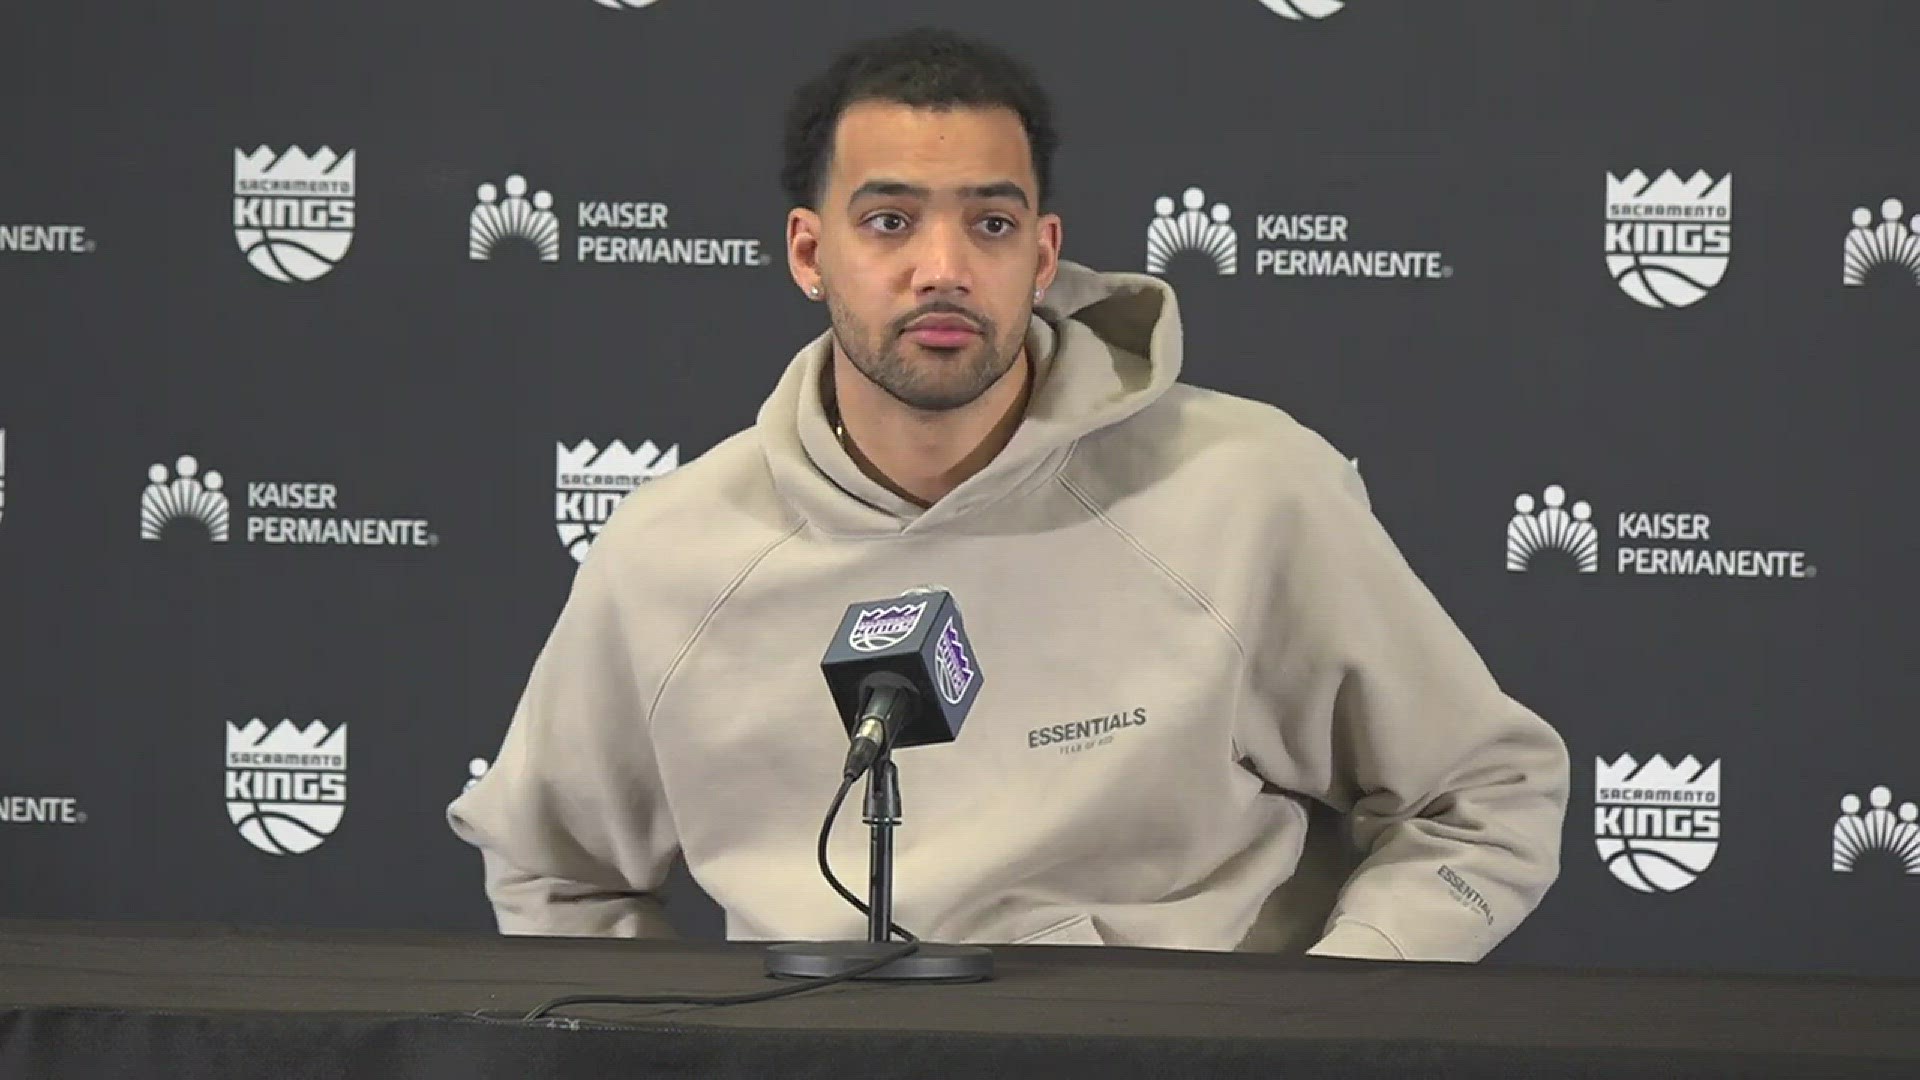 Trey Lyles talks about the revamp of the Sacramento Kings and the culture he appreciated having and how we wants to be a King again next season.